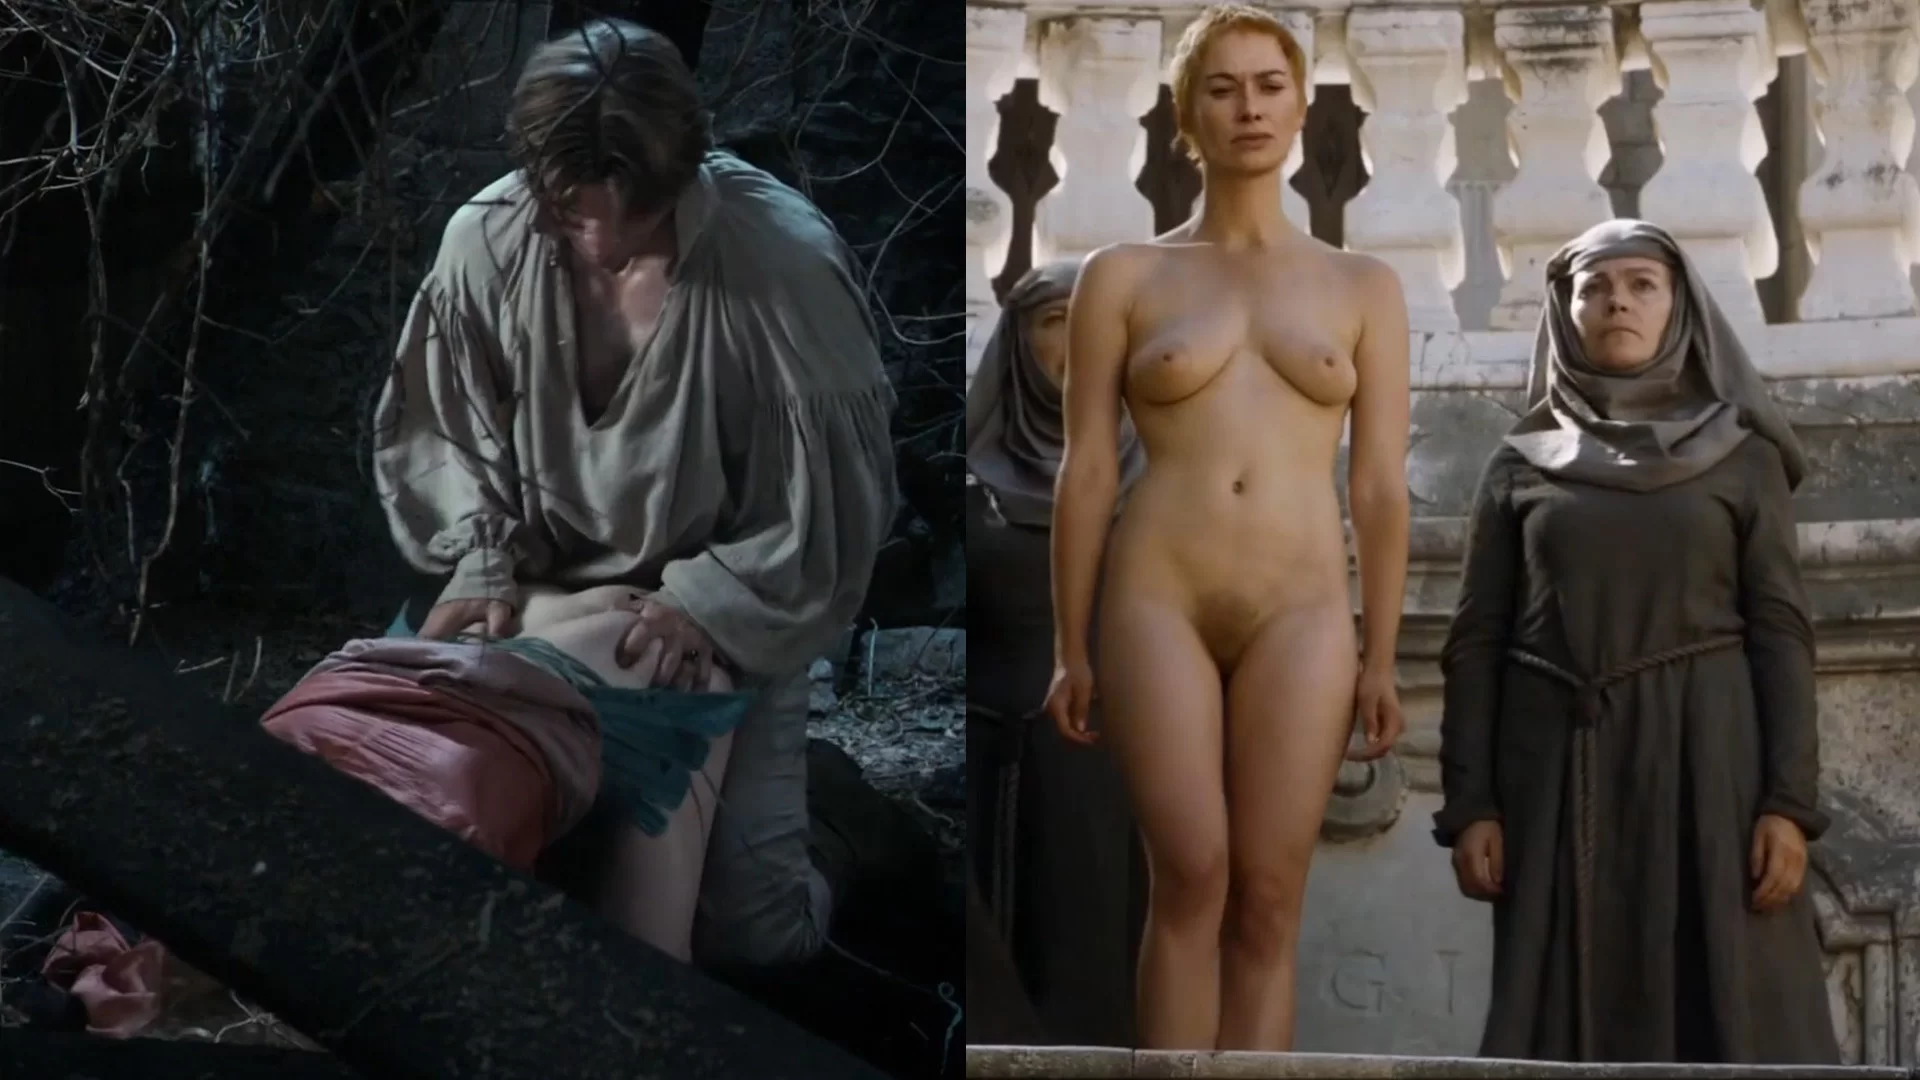 Lena Headey Nude Pictures. Rating = Unrated